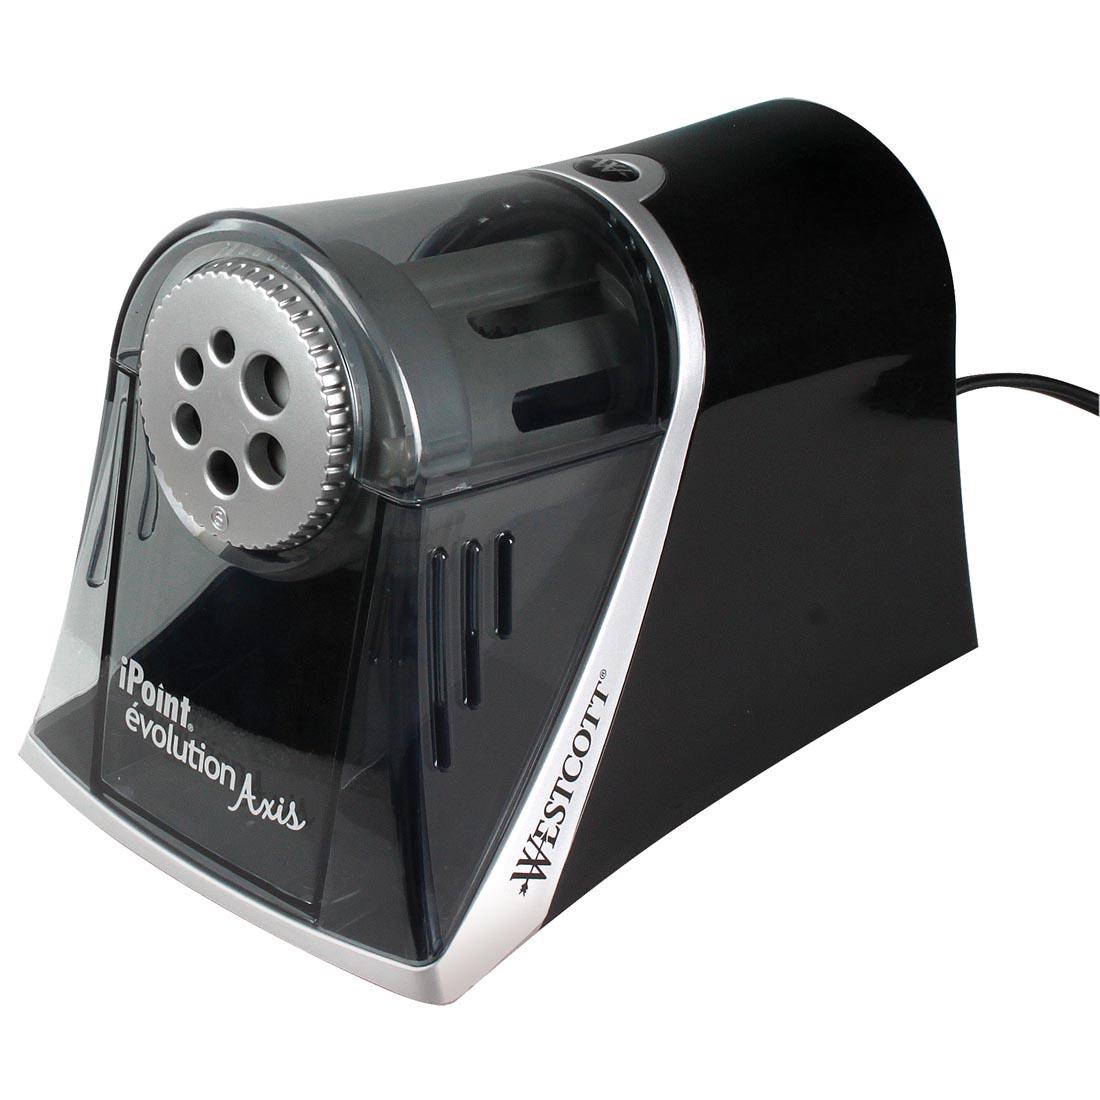 iPoint evolution Axis Electric Pencil Sharpener